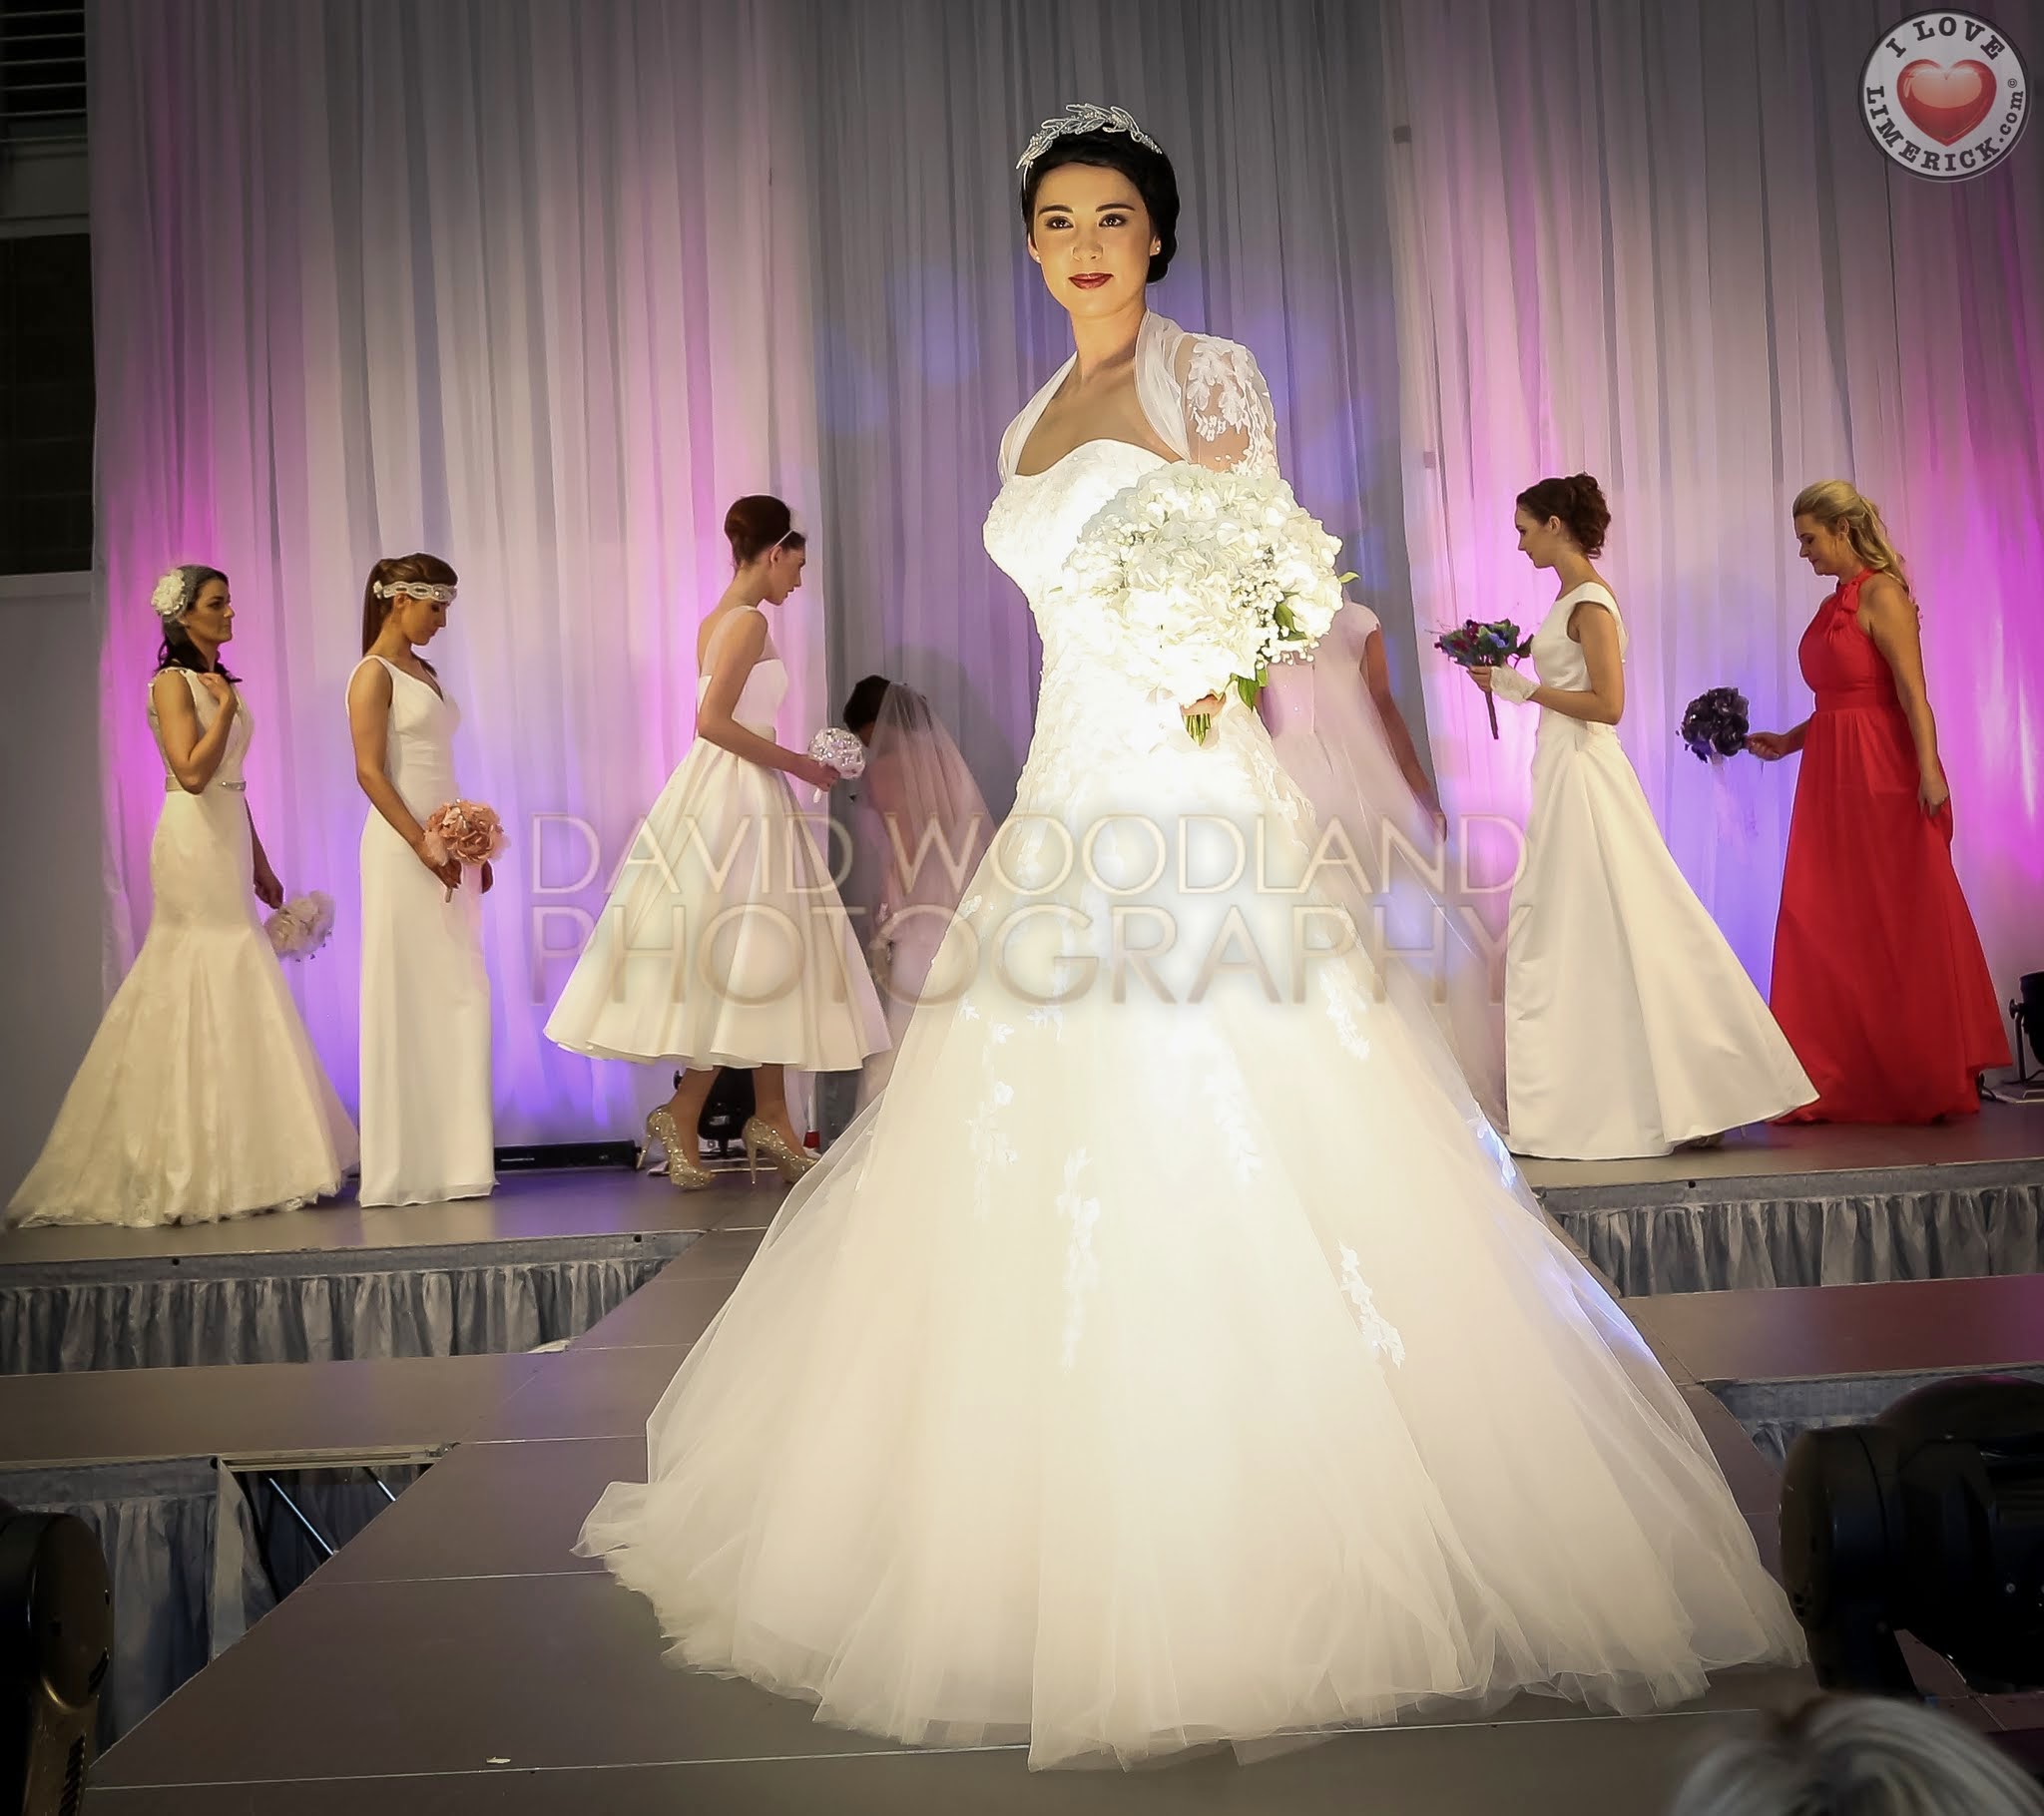 Mid-West-Bridal-Exhibition-2015.-Day-1.-DW-24